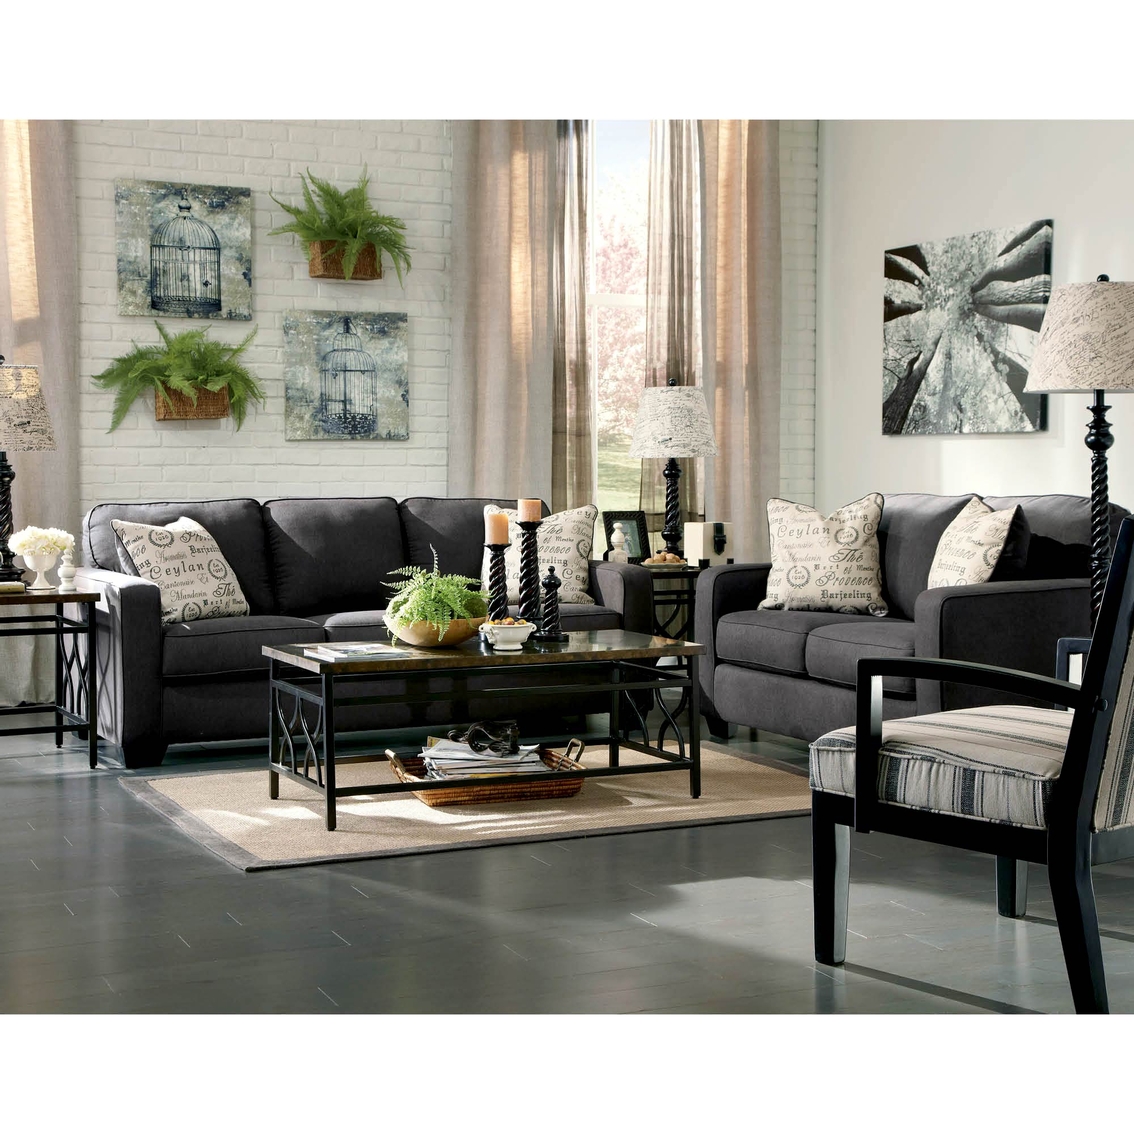 Signature Design by Ashley Alenya Loveseat, Charcoal - Image 2 of 4